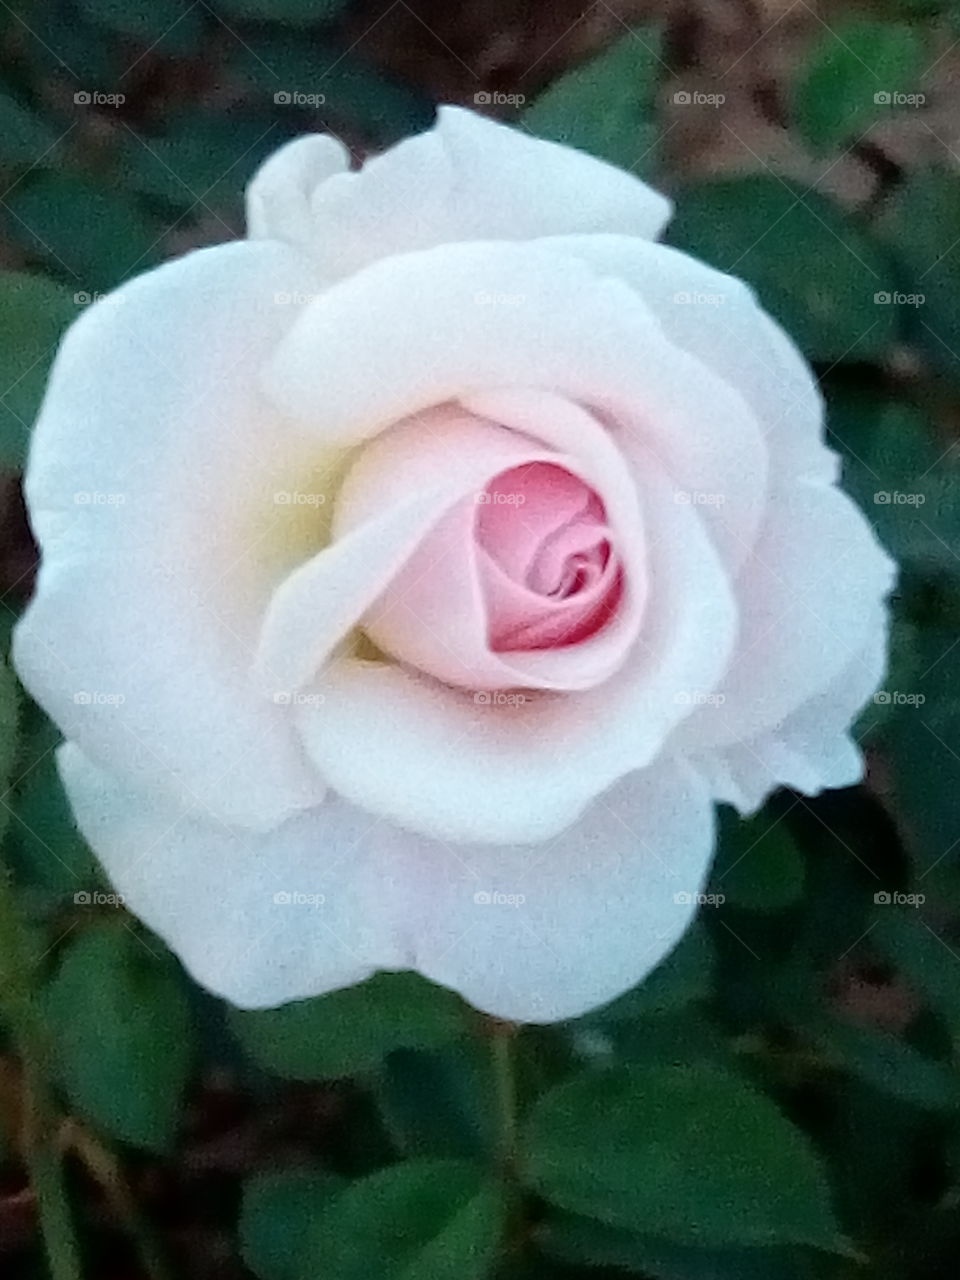 rose...the symbol of peace and love